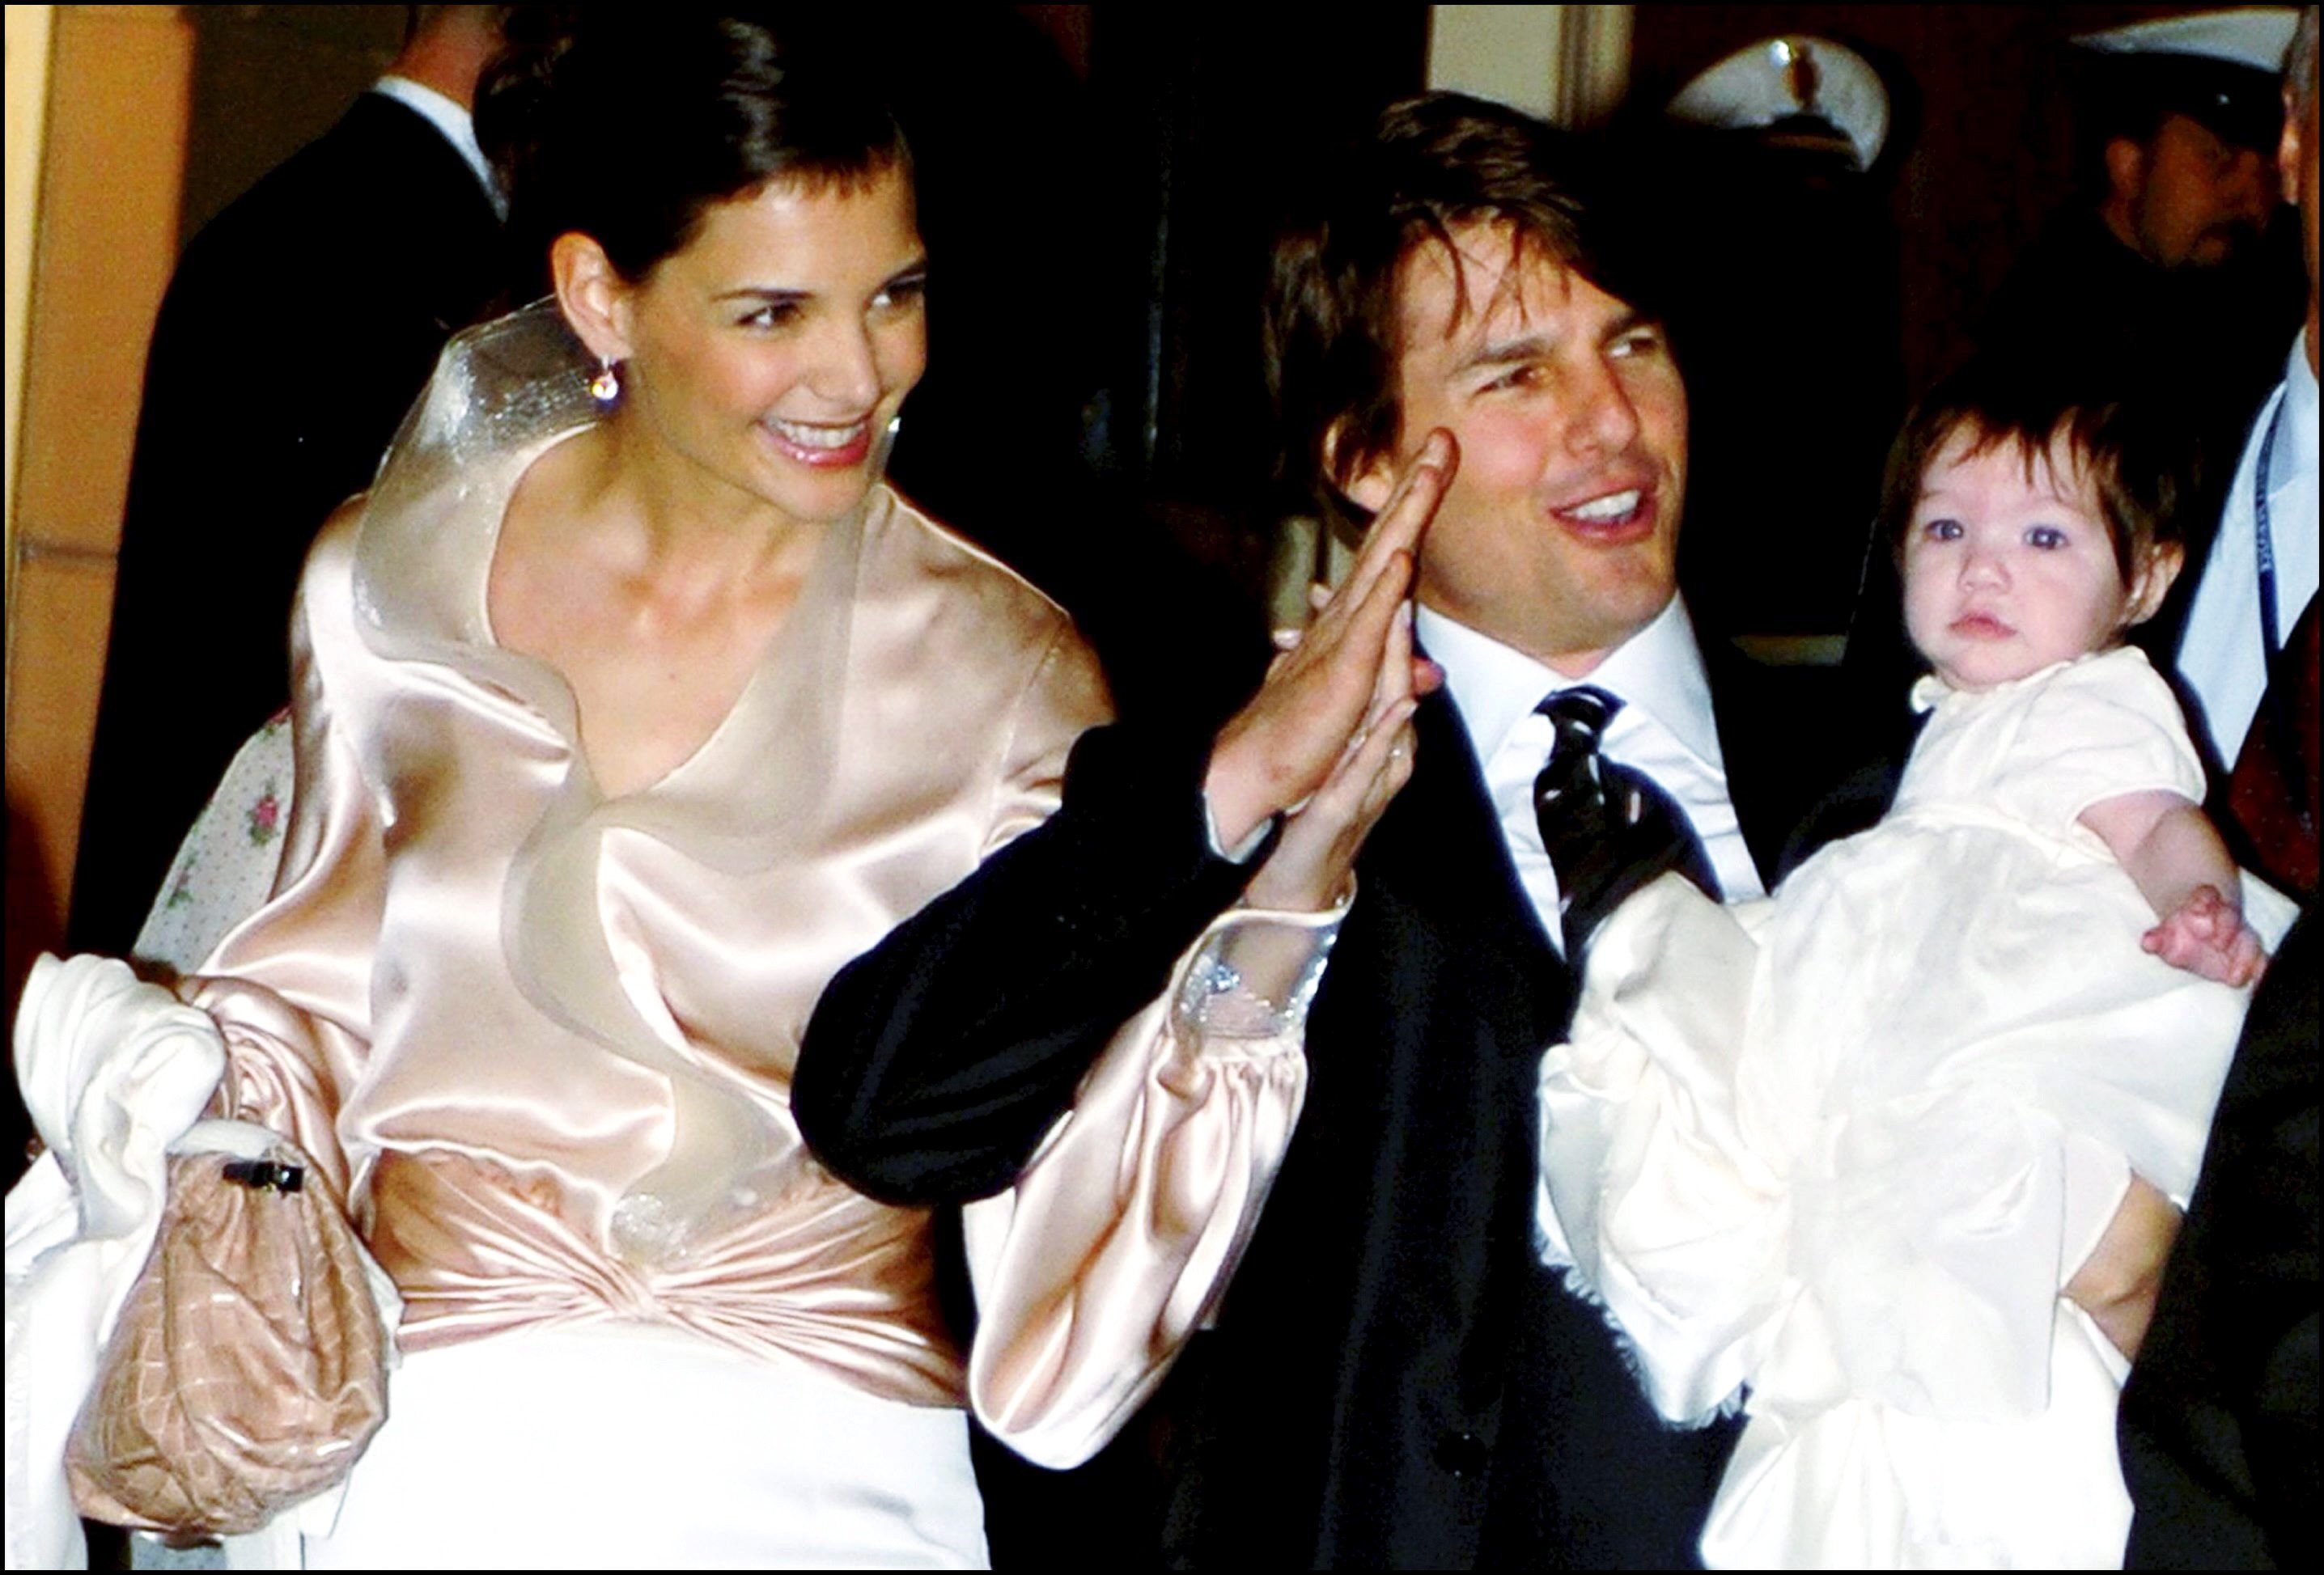 Tom Cruise, Suri Cruise and Katie Holmes in Rome for wedding in Rome, Italy on November 16, 2006. | Source: Getty Images